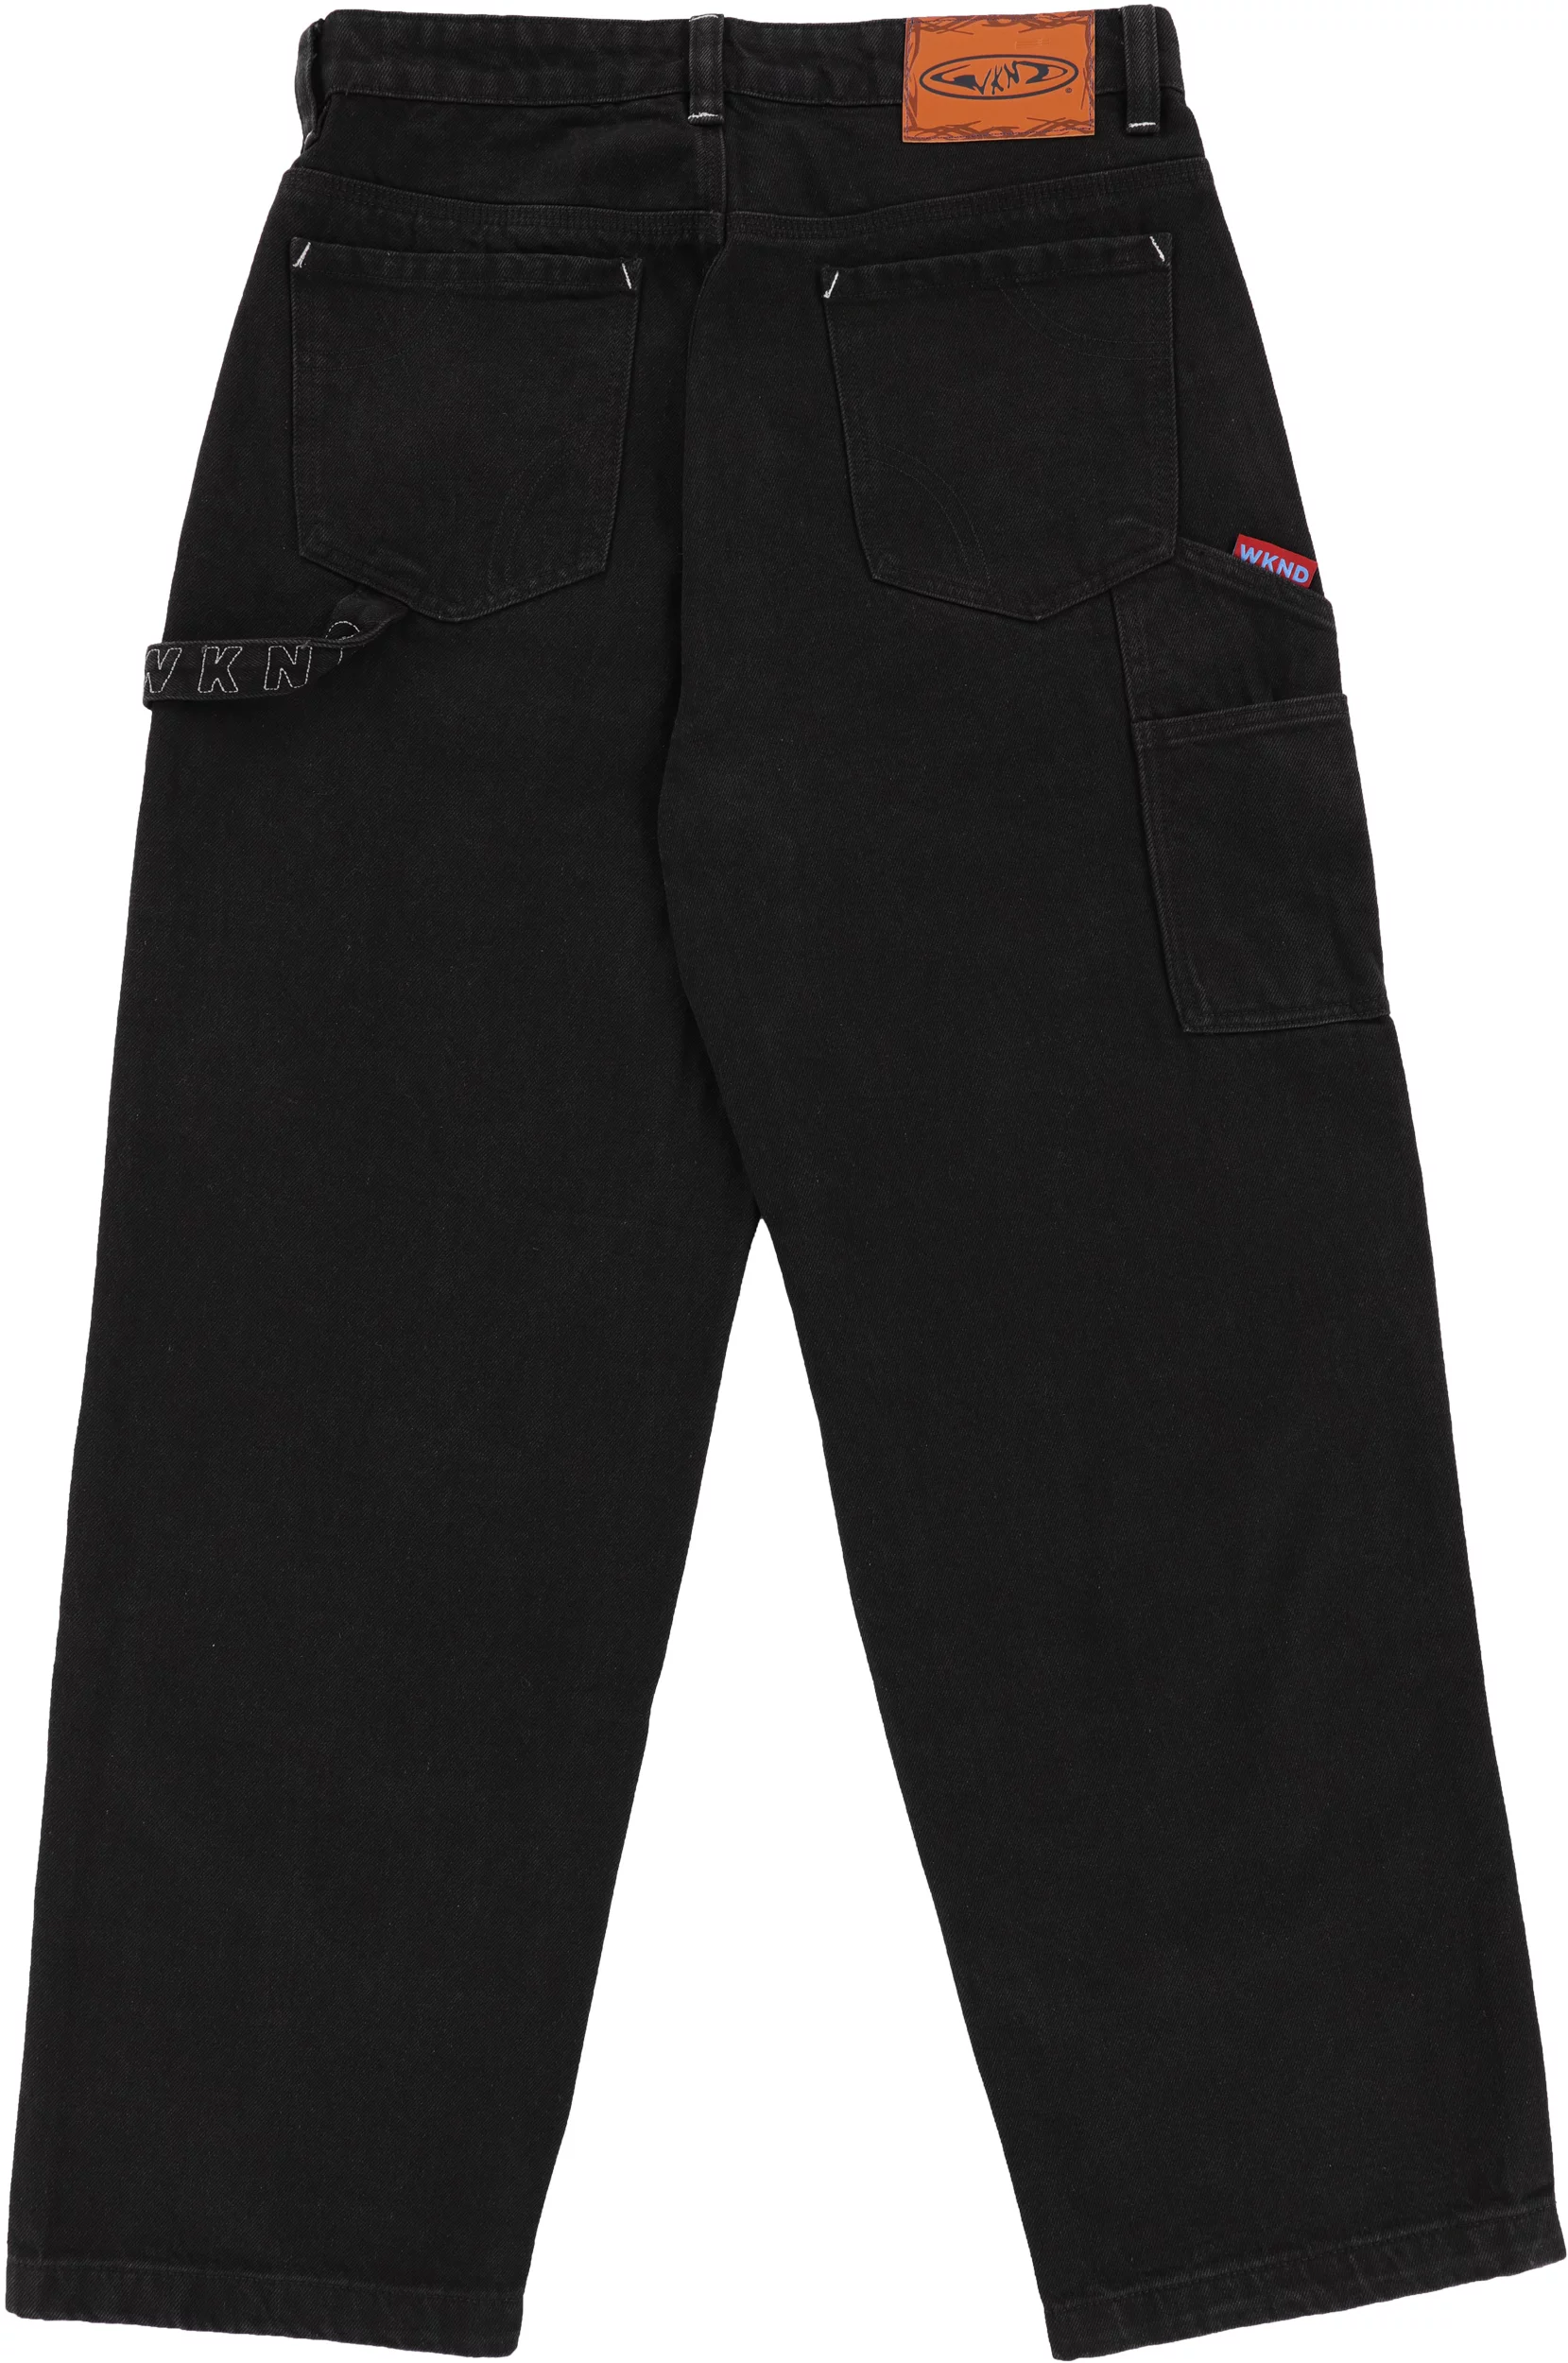 These Work Pants Are Damn Near Perfect